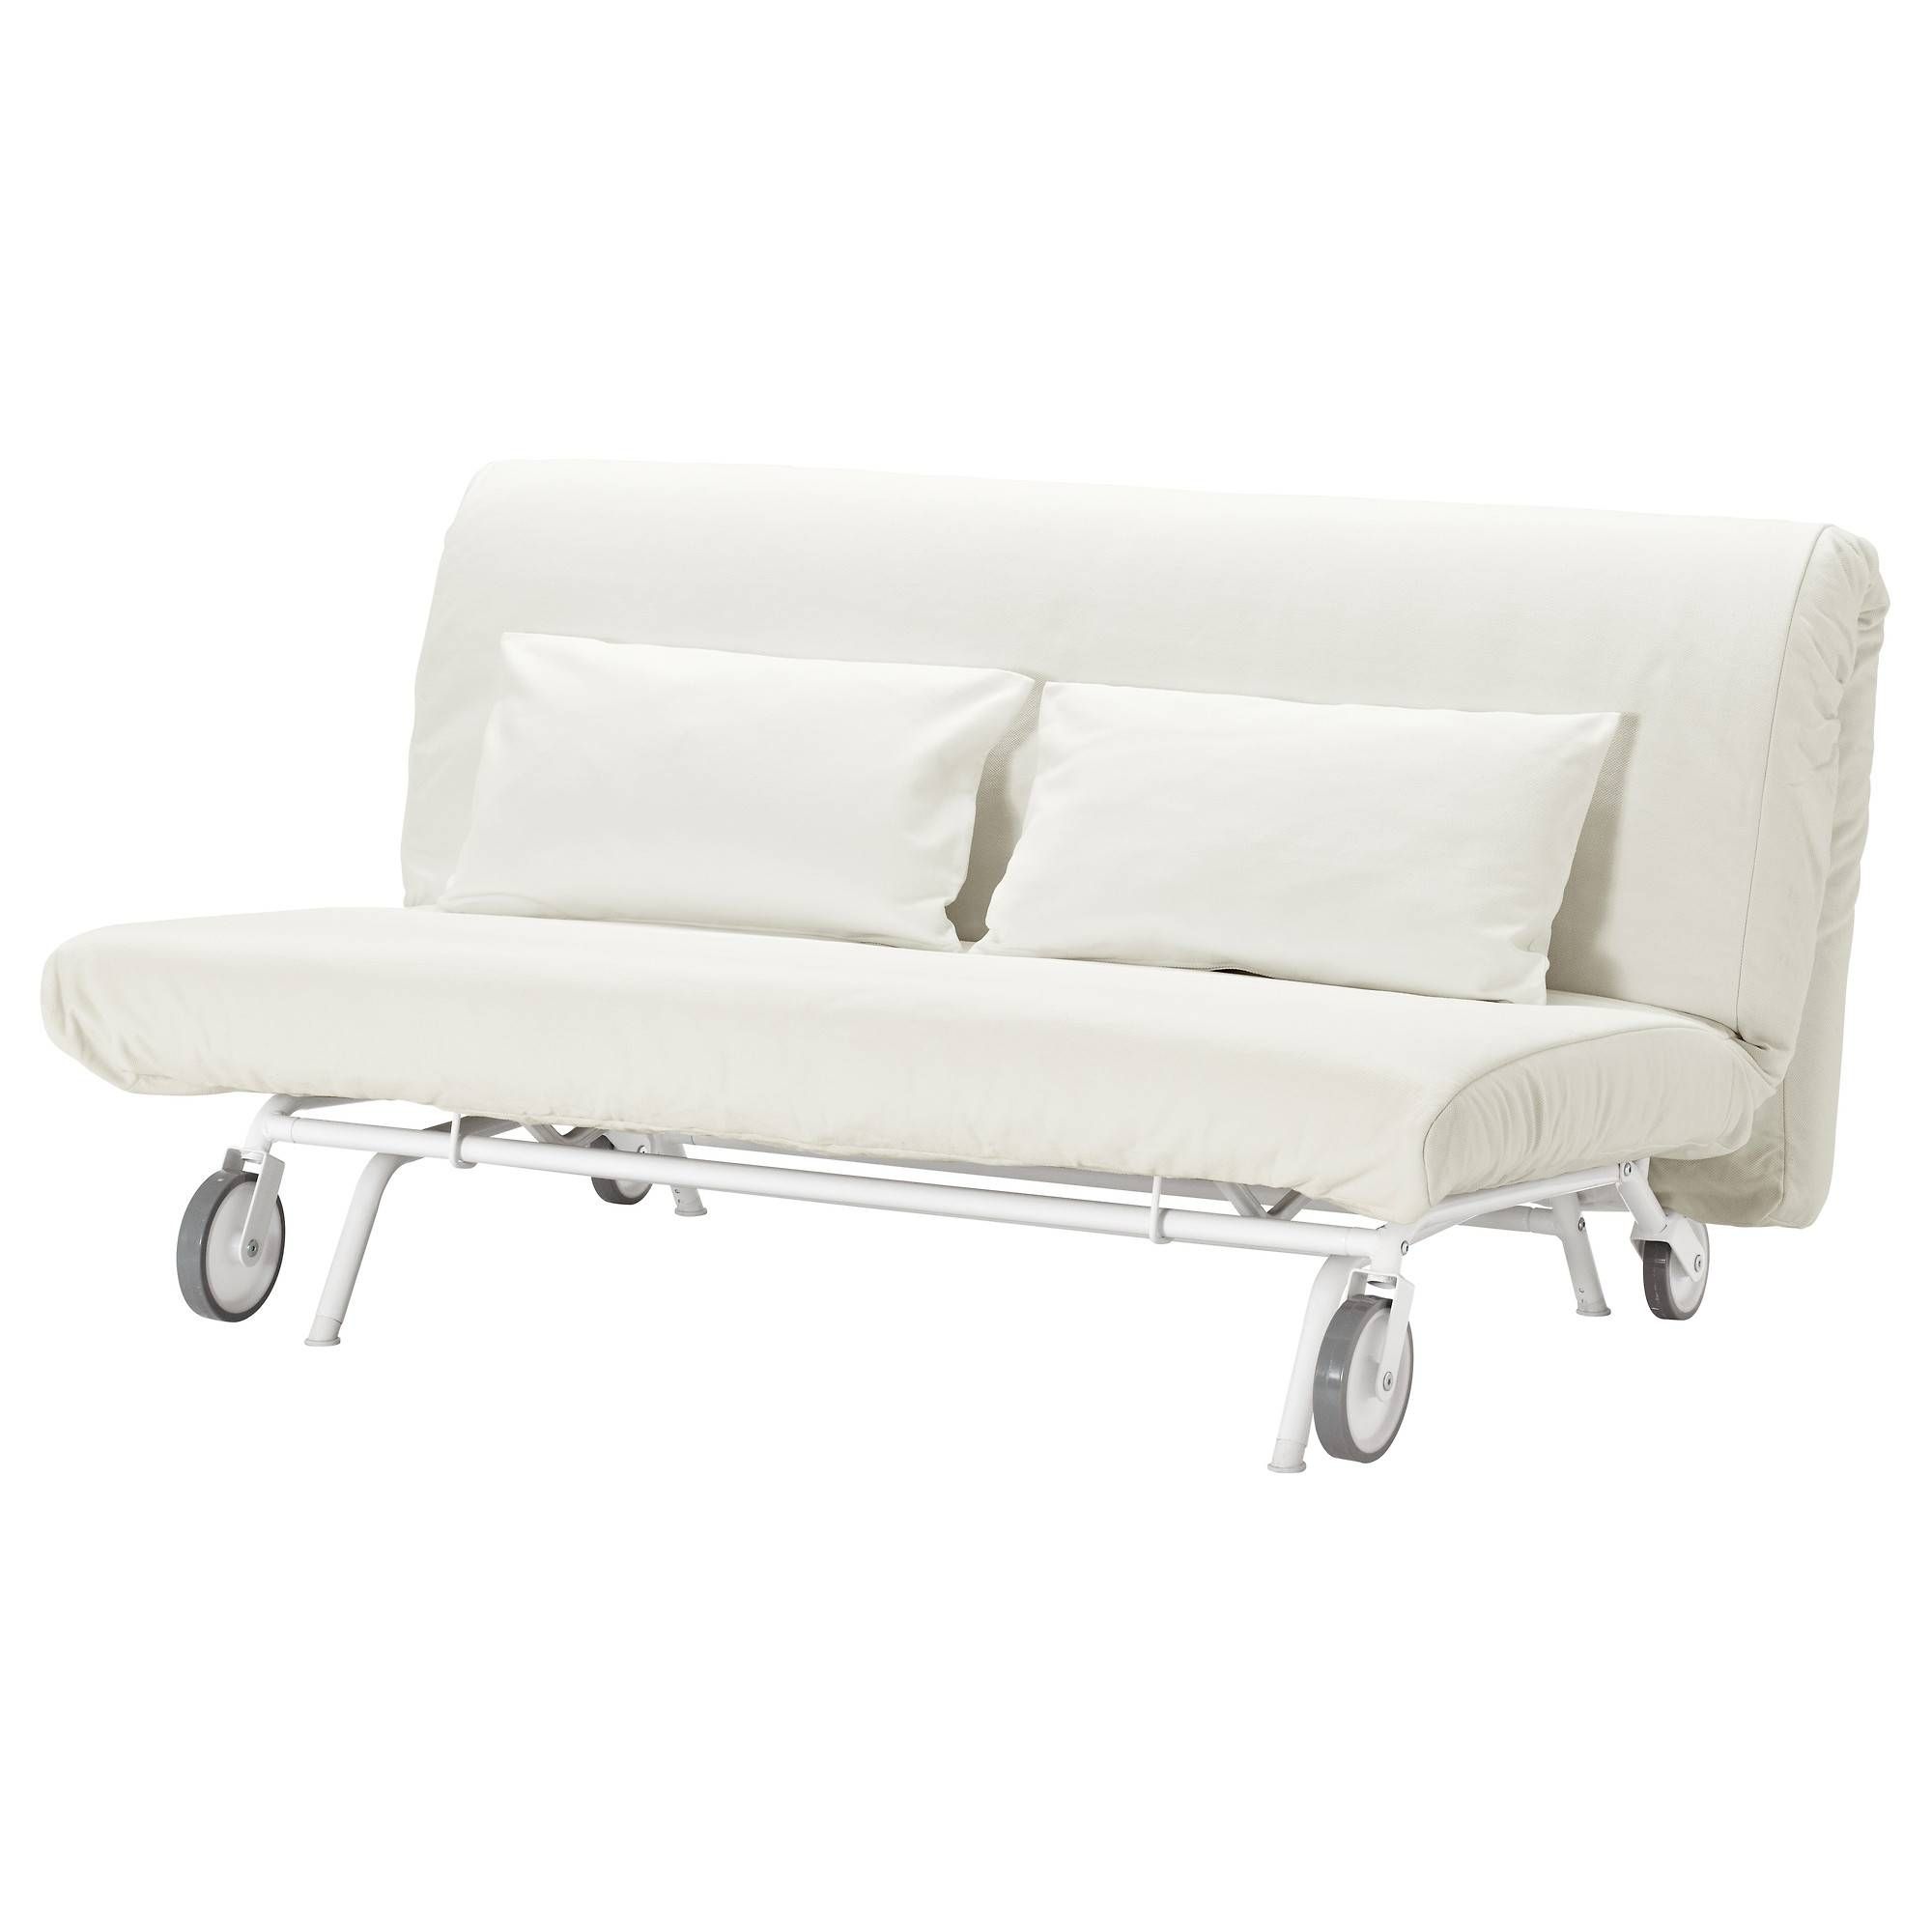 Ikea Ps Håvet Two Seat Sofa Bed Gräsbo White – Ikea Intended For Sofa Chairs Ikea (View 14 of 30)